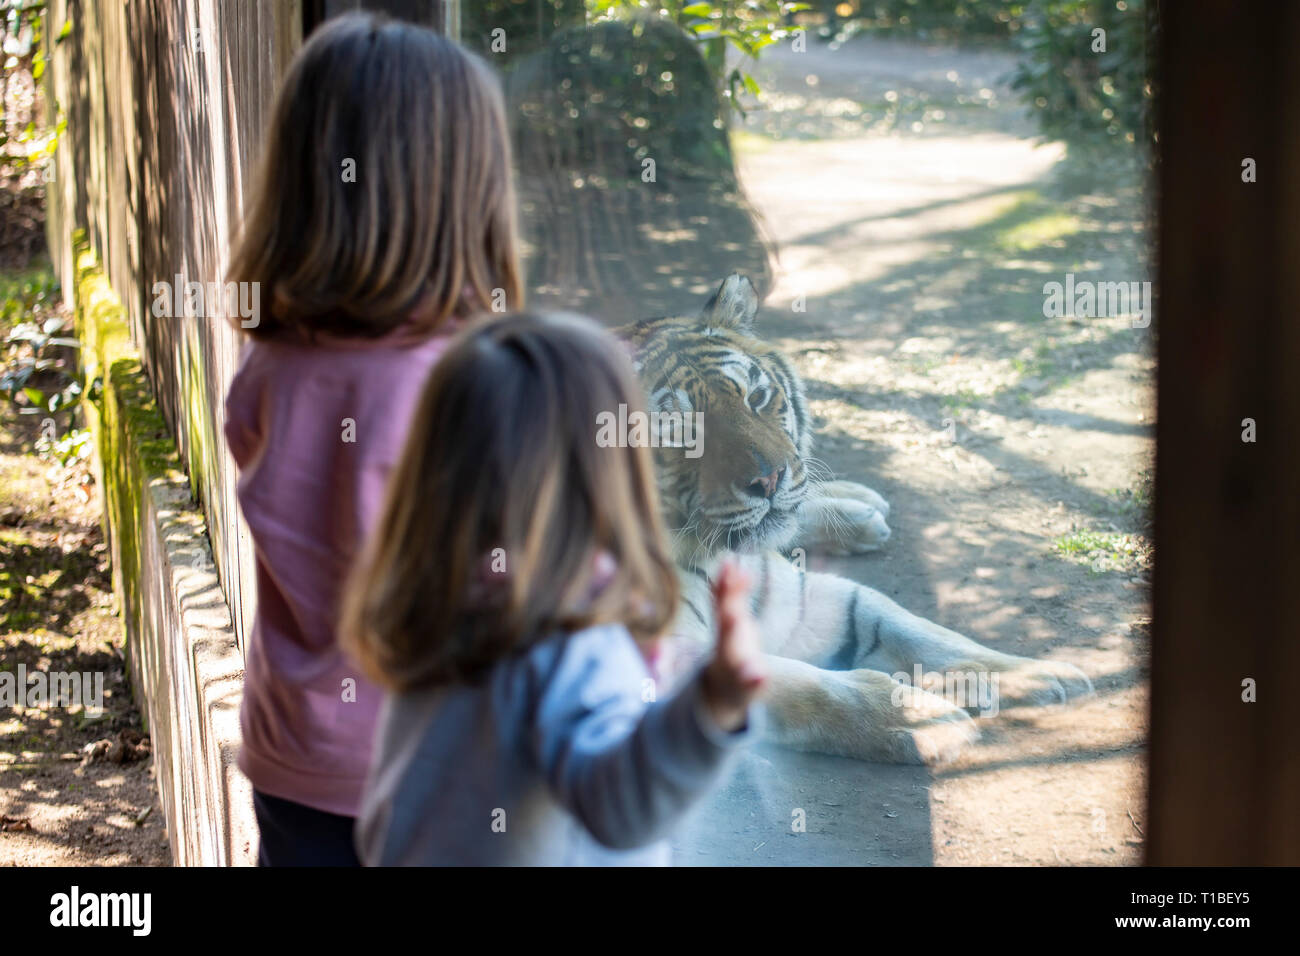 Two baby girls watching a siberian tiger through the glass of its enclosure Stock Photo